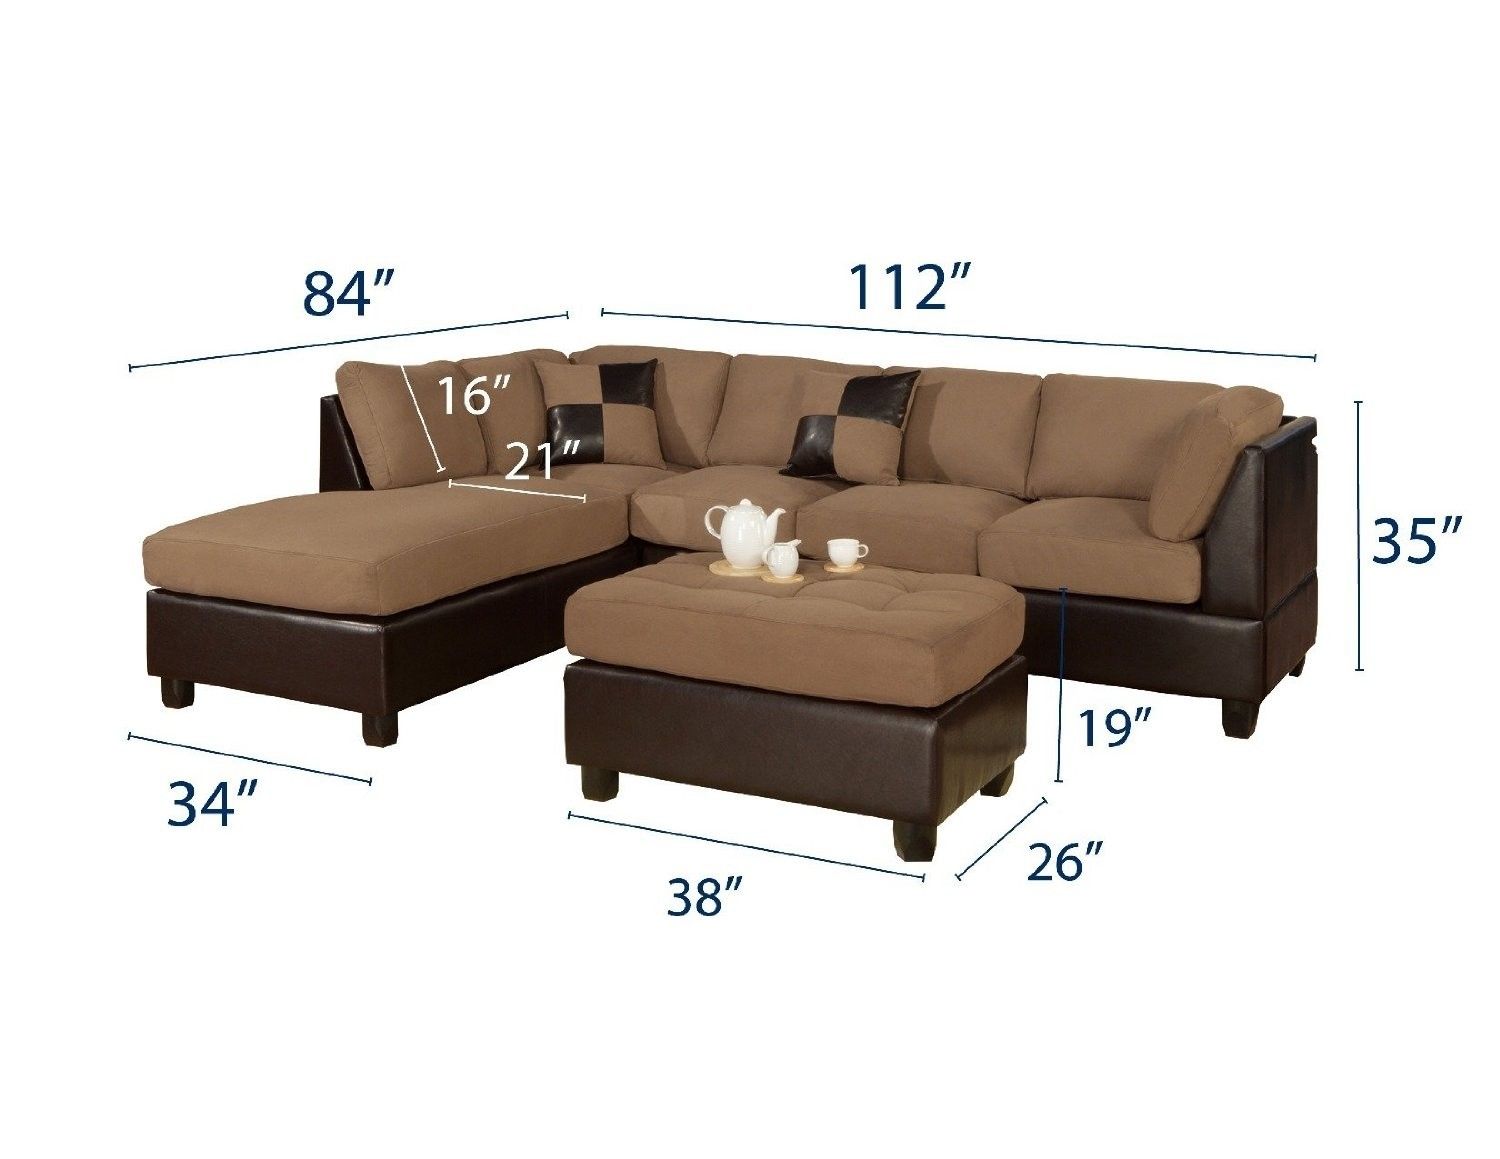 84 Inch Sectional Sofa Inspirational Magnolia Homejoanna Gaines Regarding Magnolia Home Homestead 3 Piece Sectionals By Joanna Gaines (View 16 of 30)